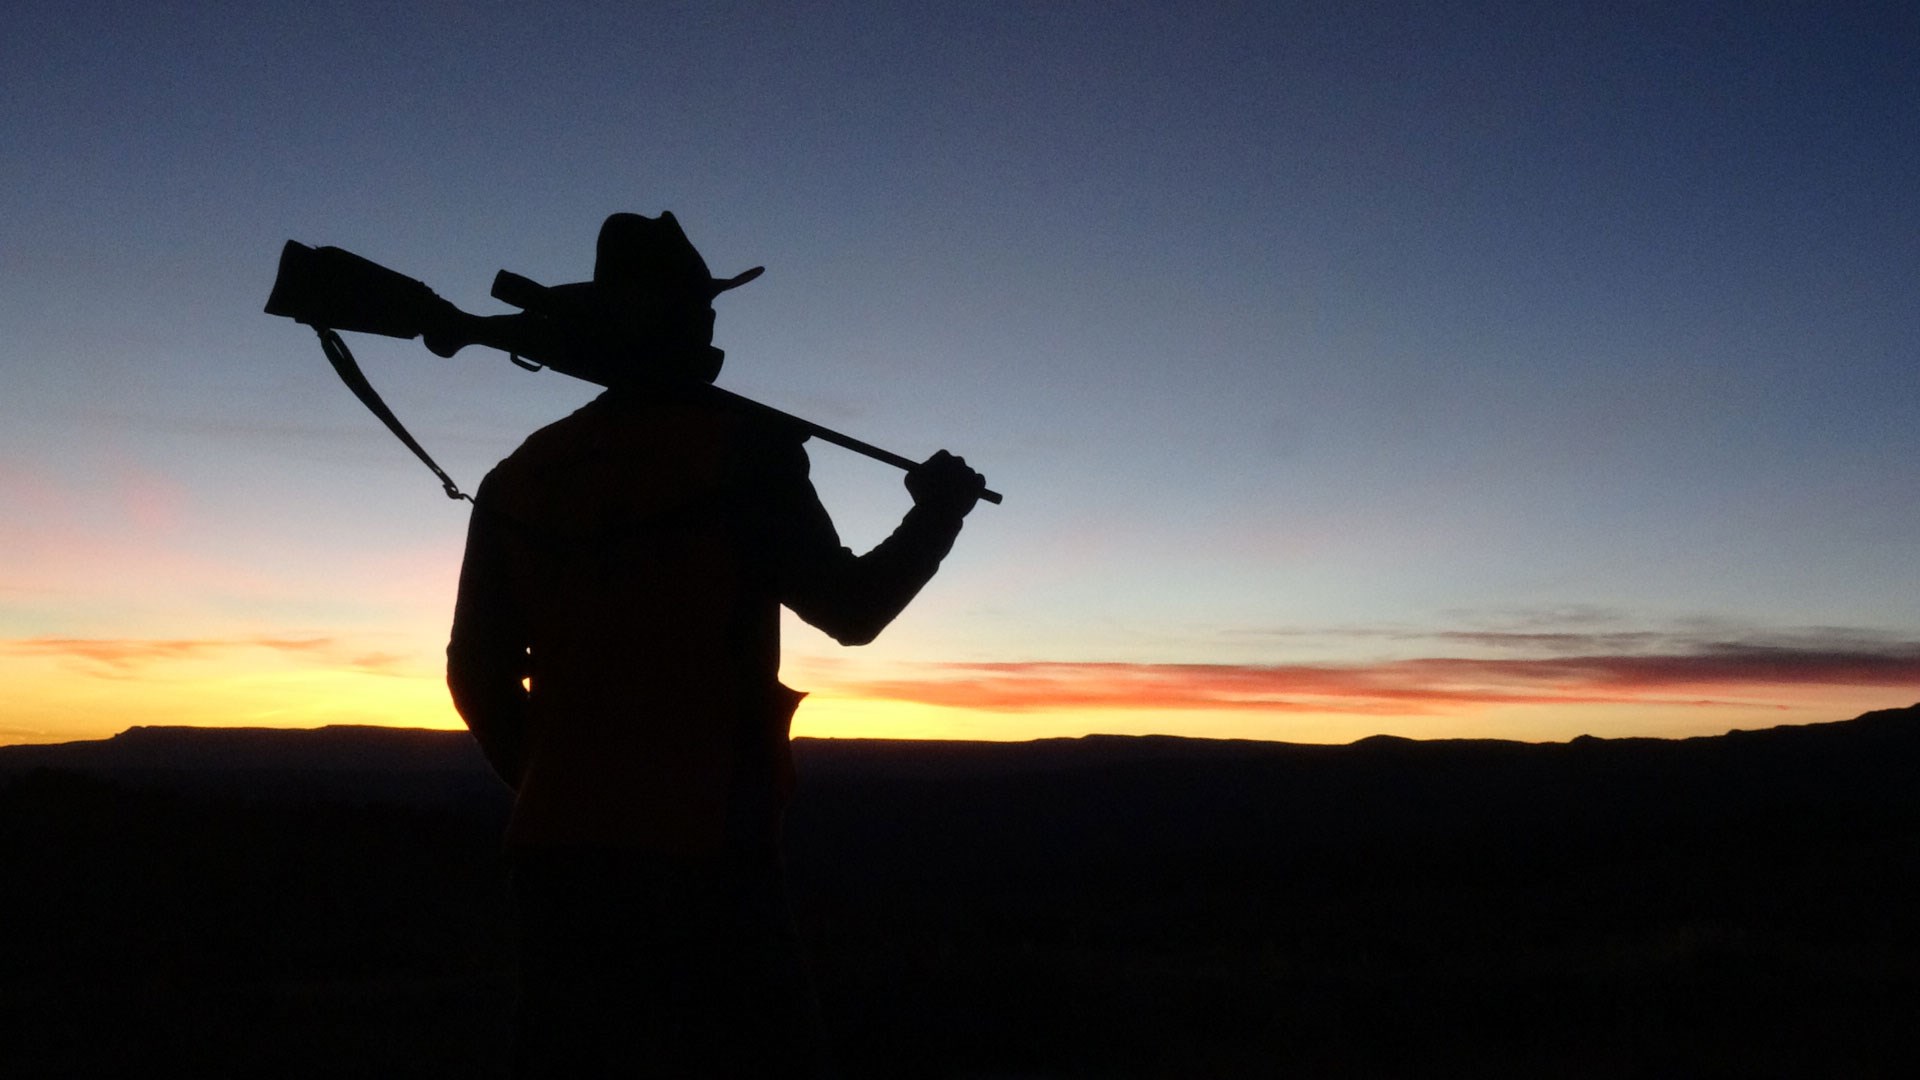 Hunter silhouetted at sunset